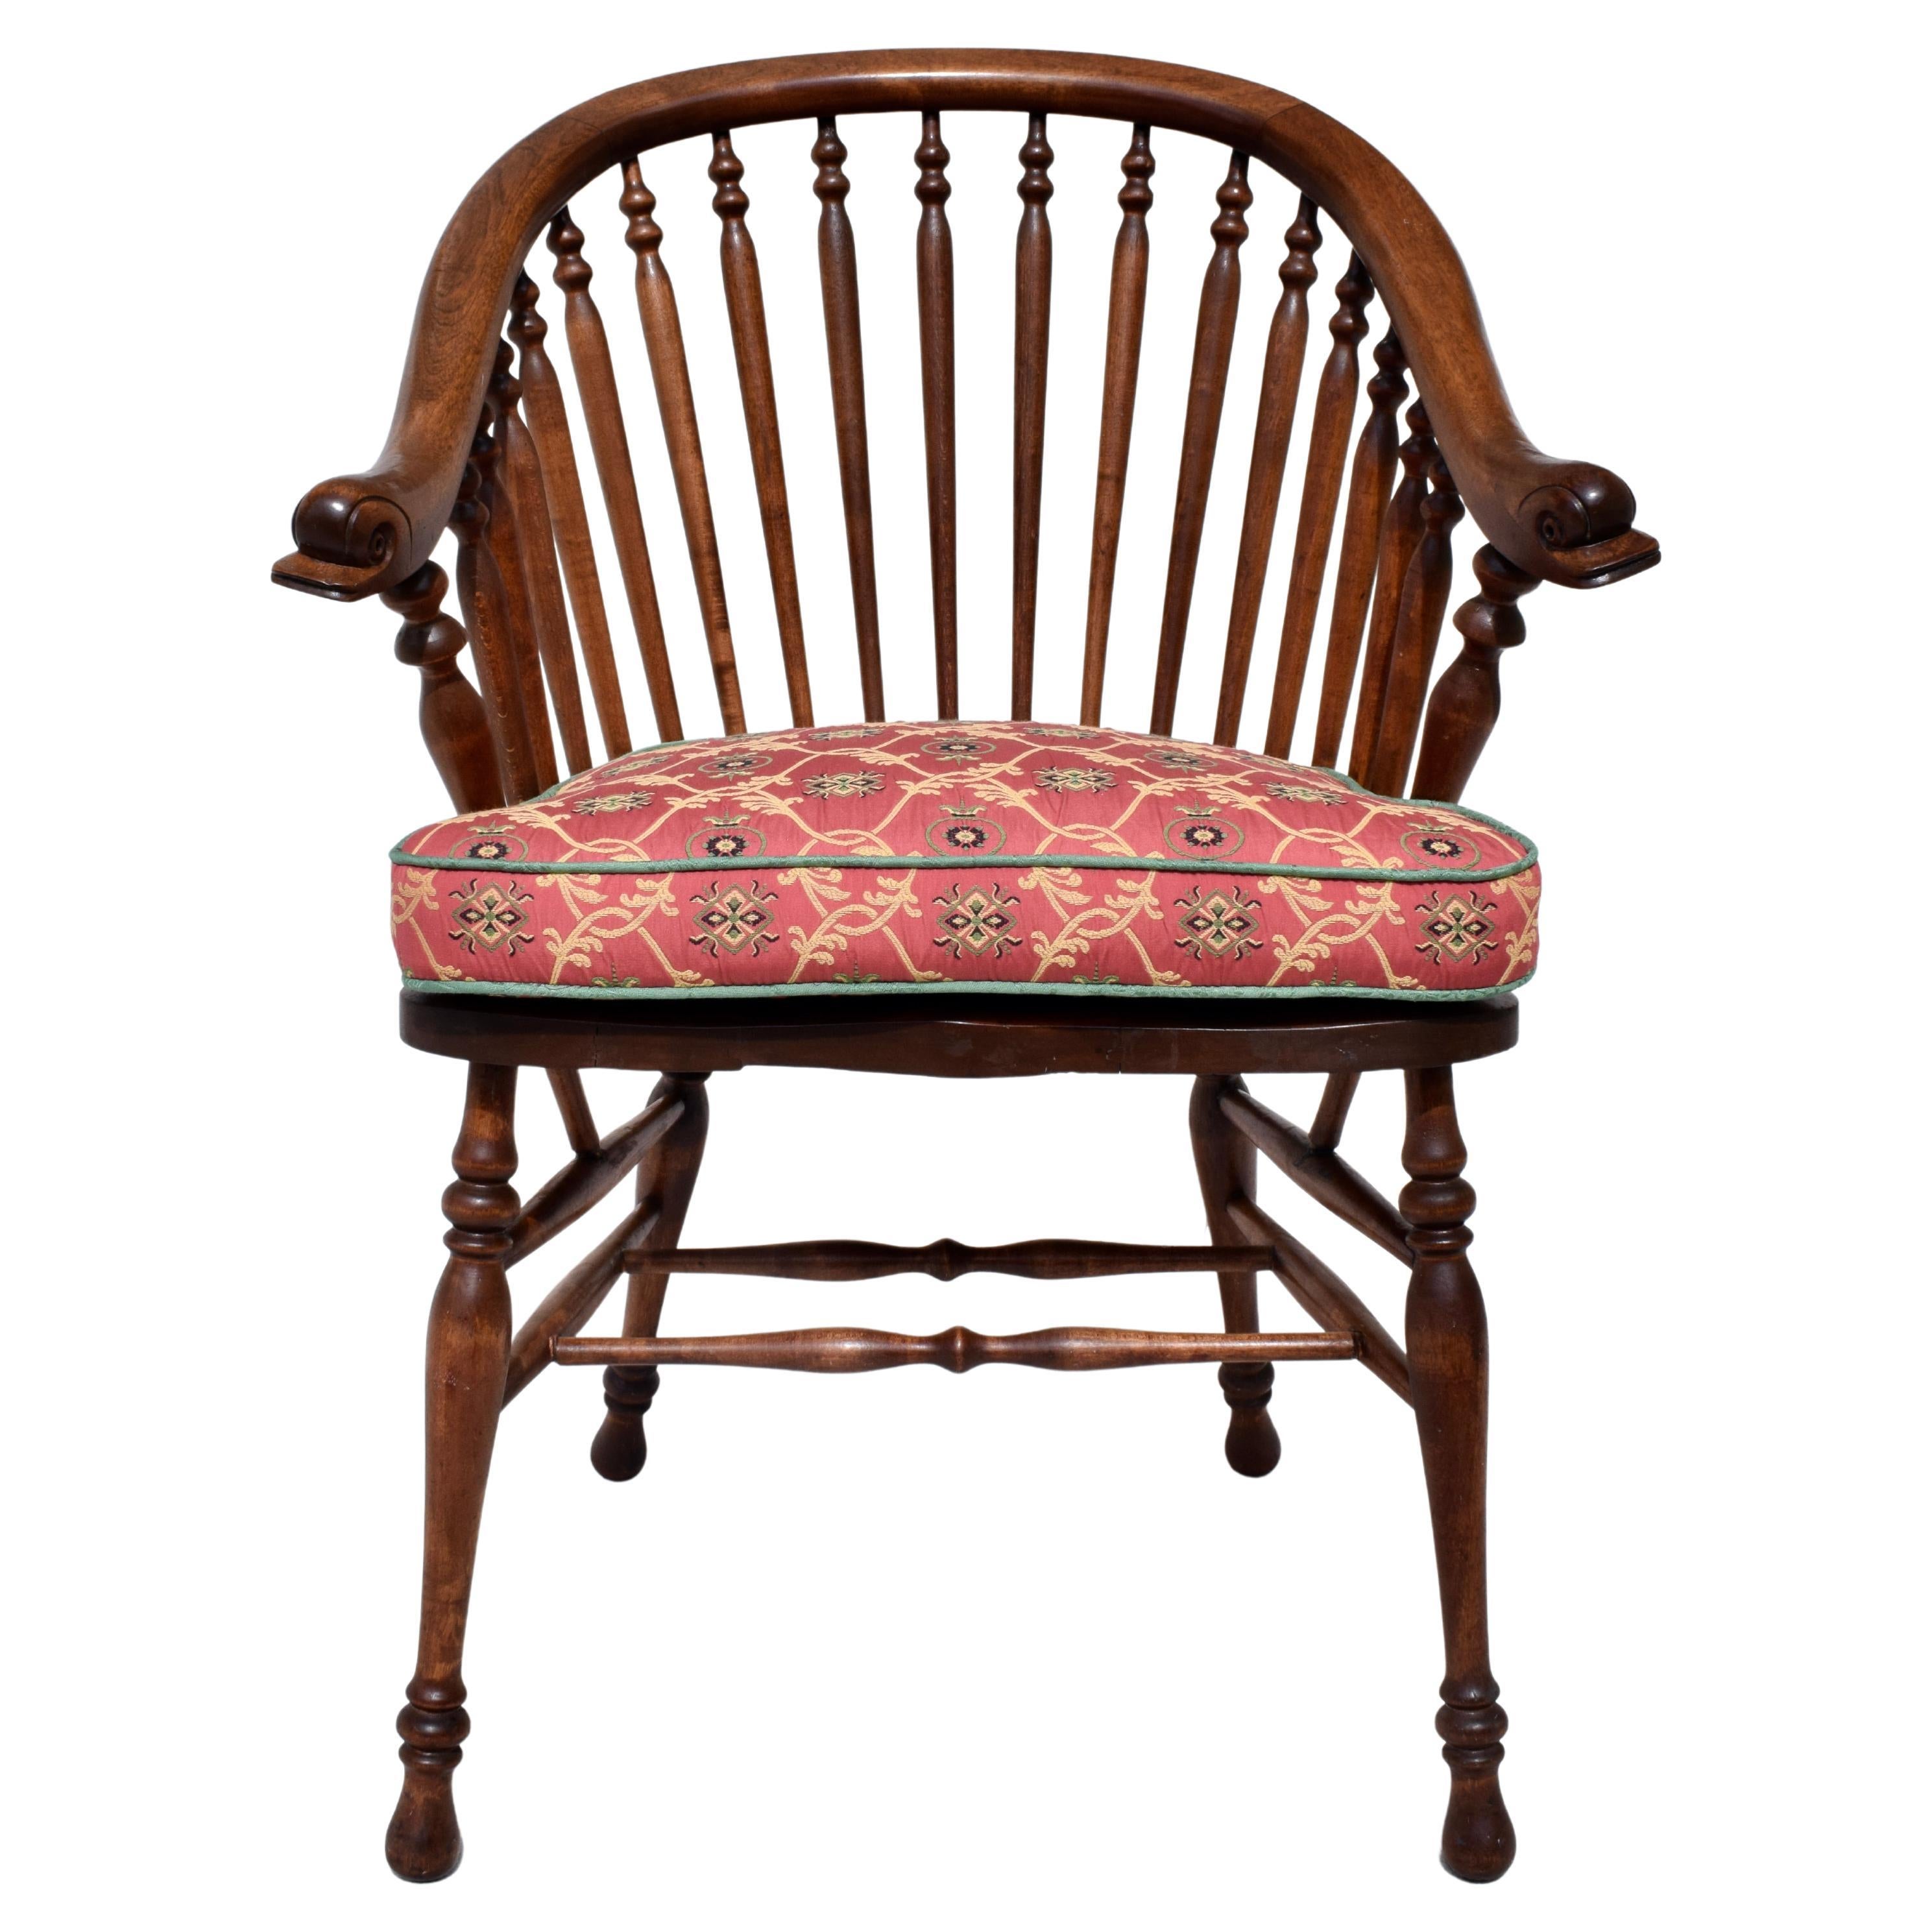 19th C. Windsor Style Chair with Dolfin Head Arms For Sale